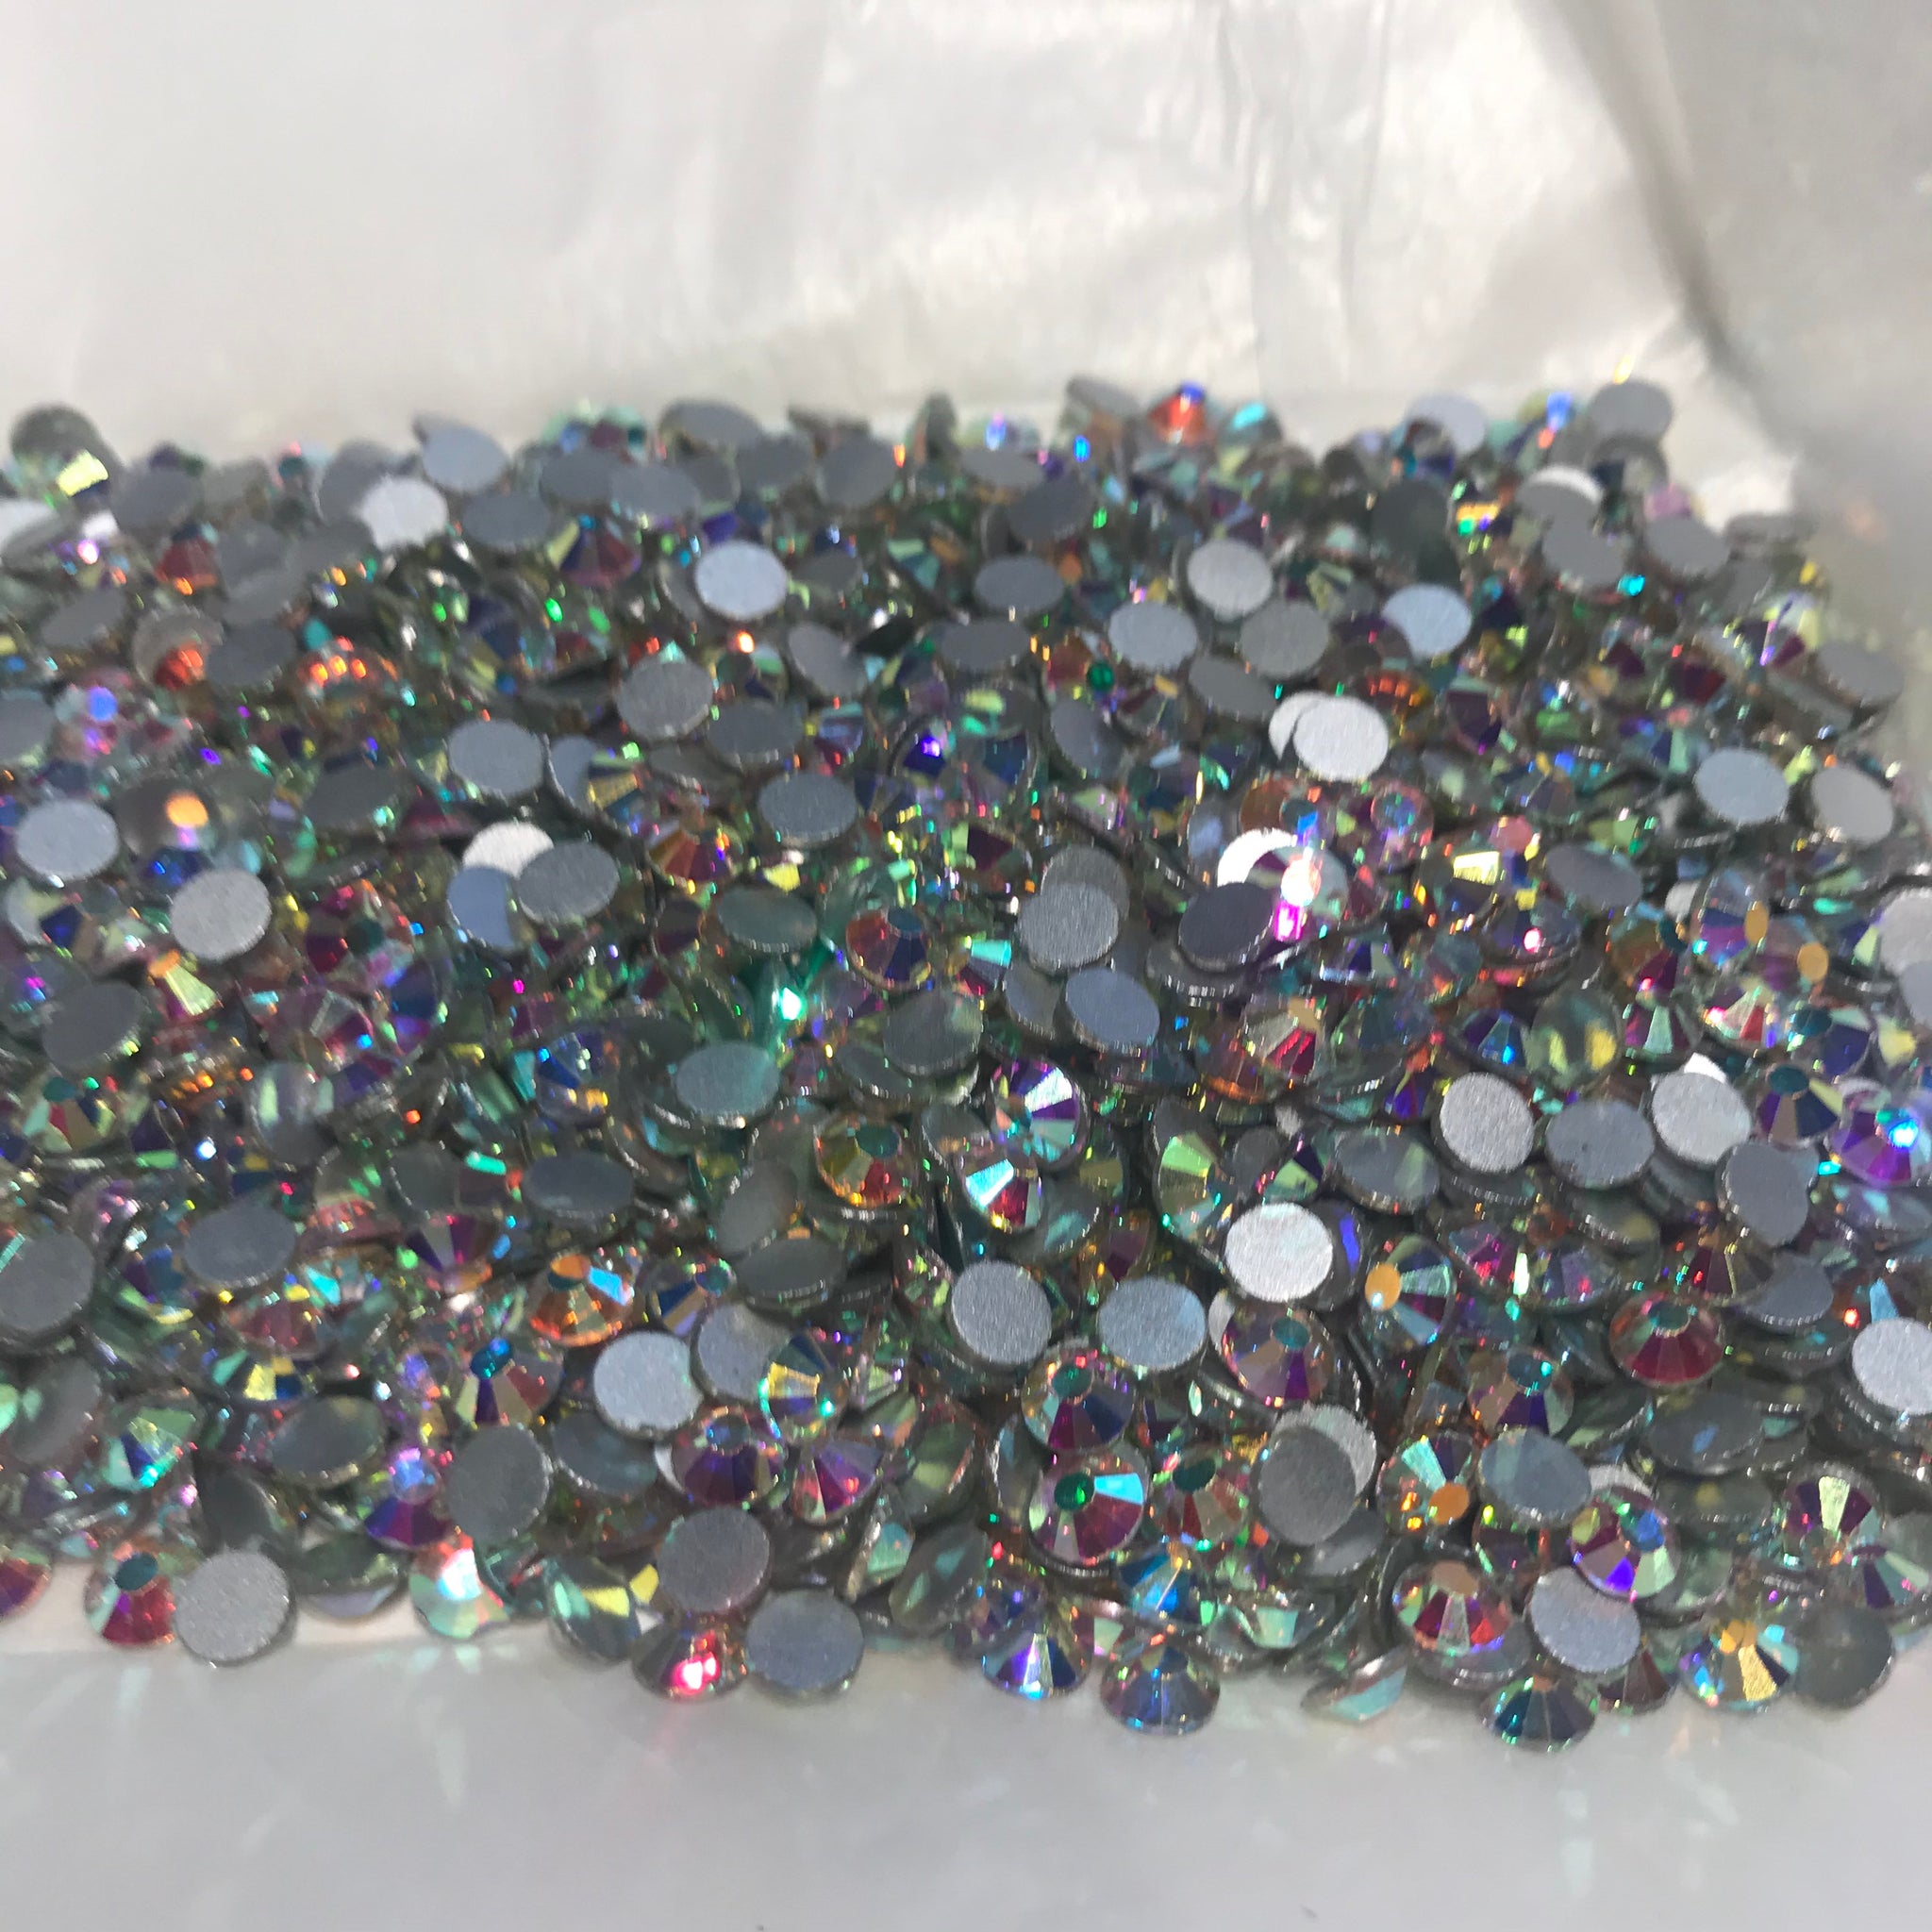 Rhinestones-Glass Round Flat Back- Crystal AB - approx. 1440 loose pieces